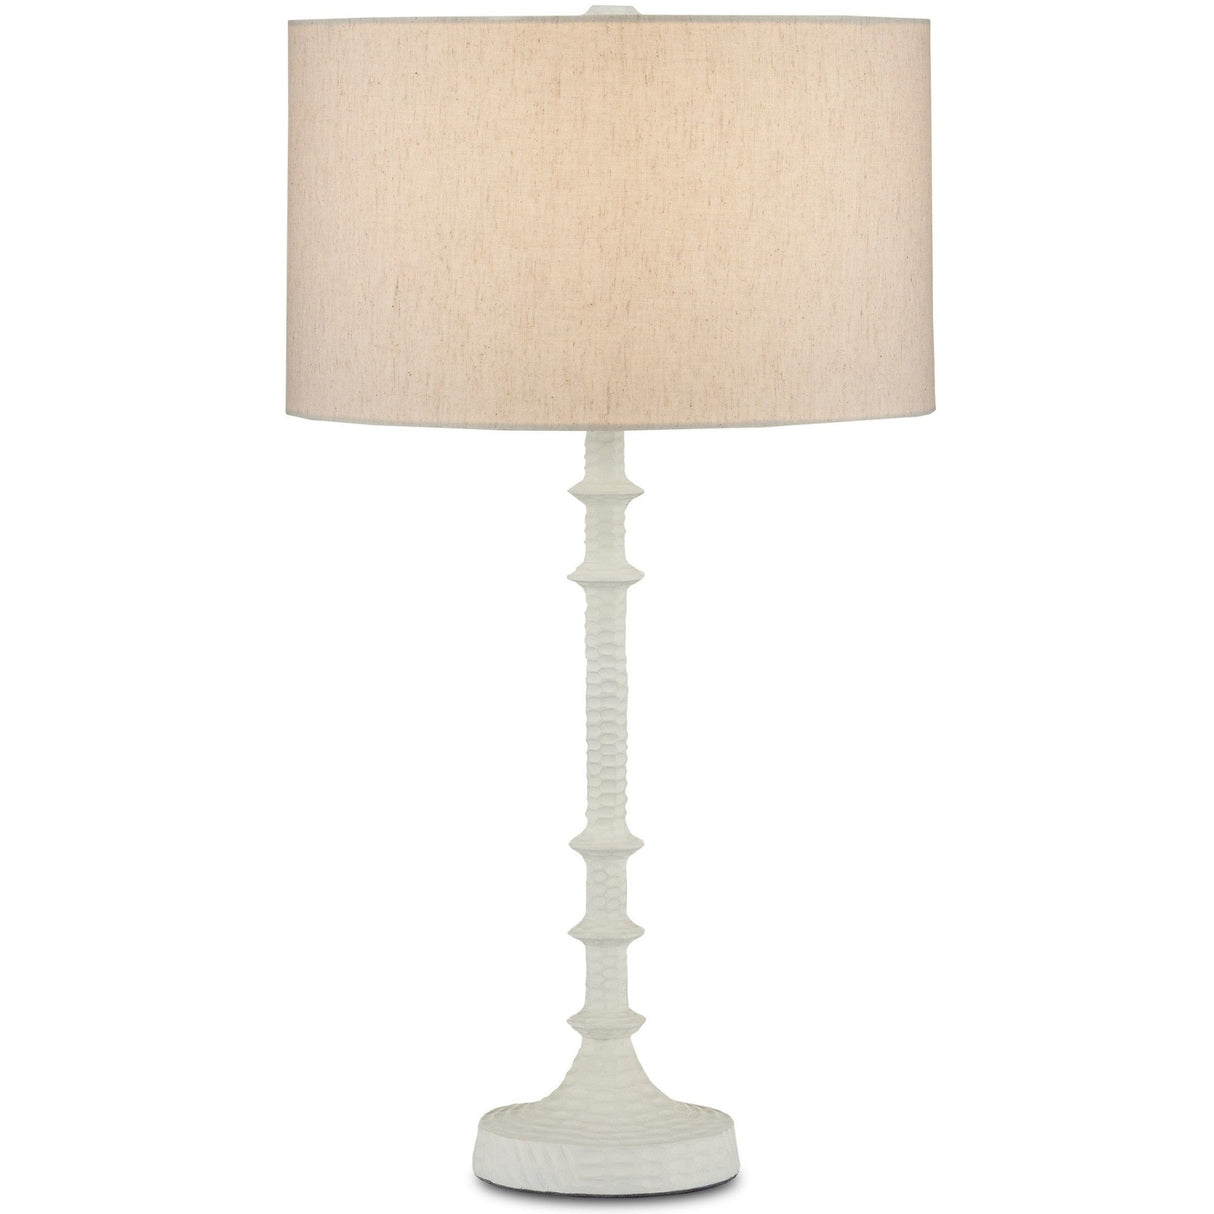 Currey & Company Gallo White Table Lamp Table Lamps currey-co-6000-0868 633306051409